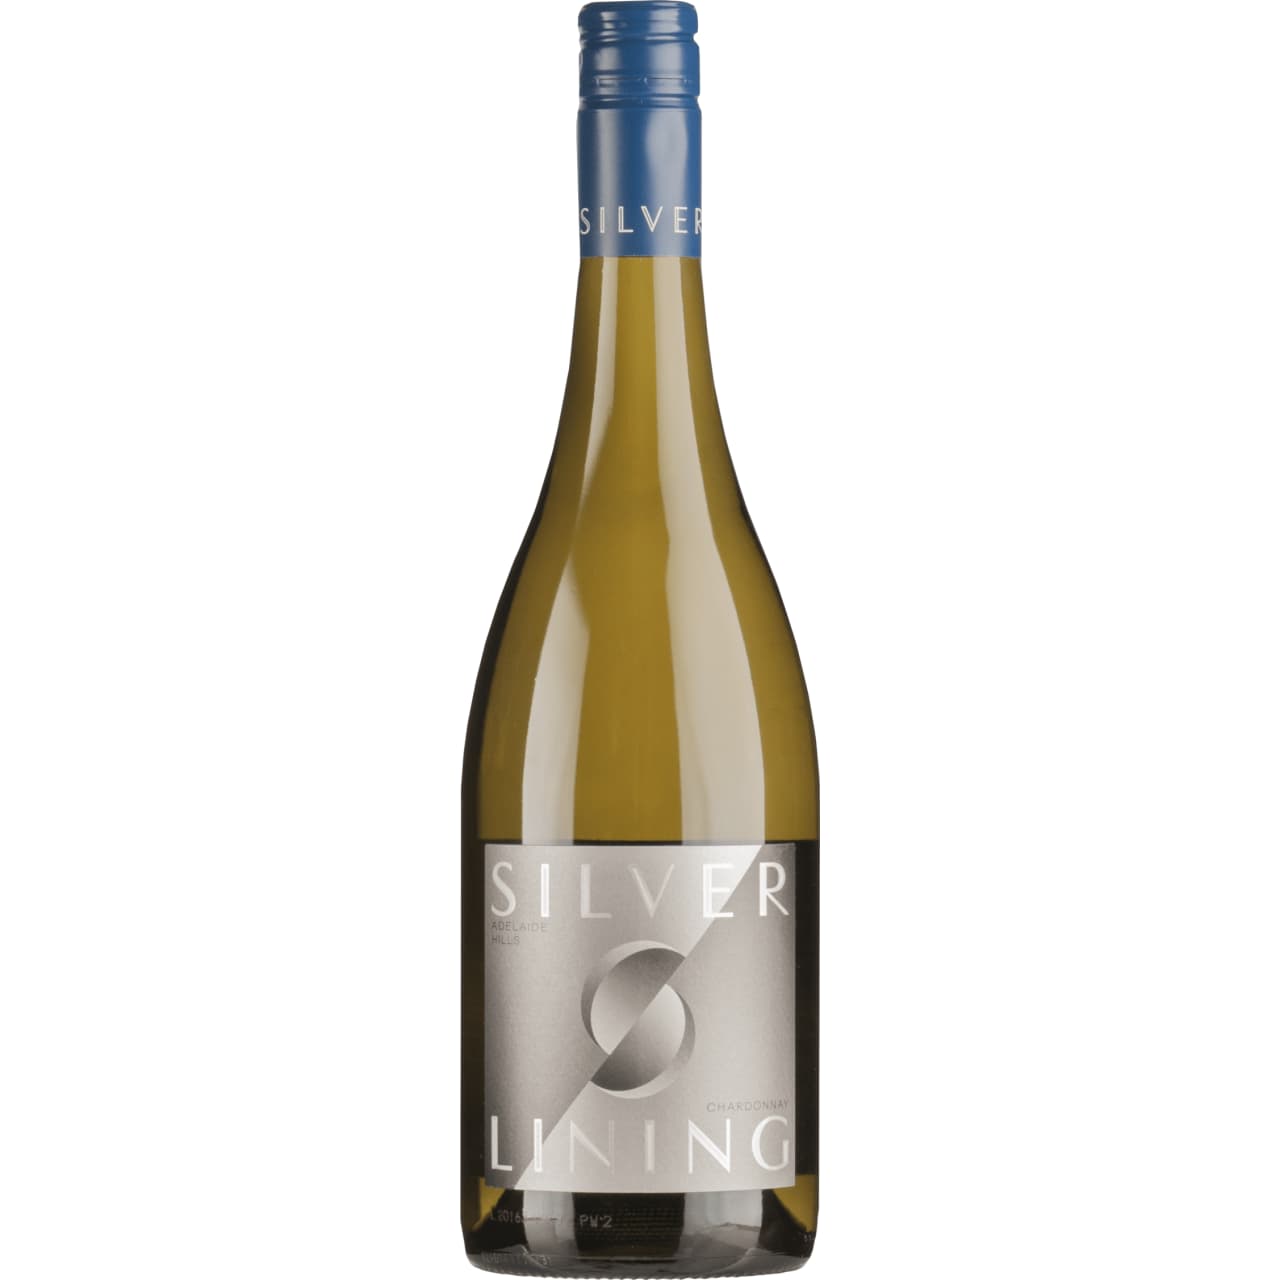 Lifted florals, citrus and white peach aromas. Complex lemon sorbet flavours with loads of minerality. Compact, linear and crisp with poise, balance and tension. Finely integrated new and seasoned French oak. Gorgeous.